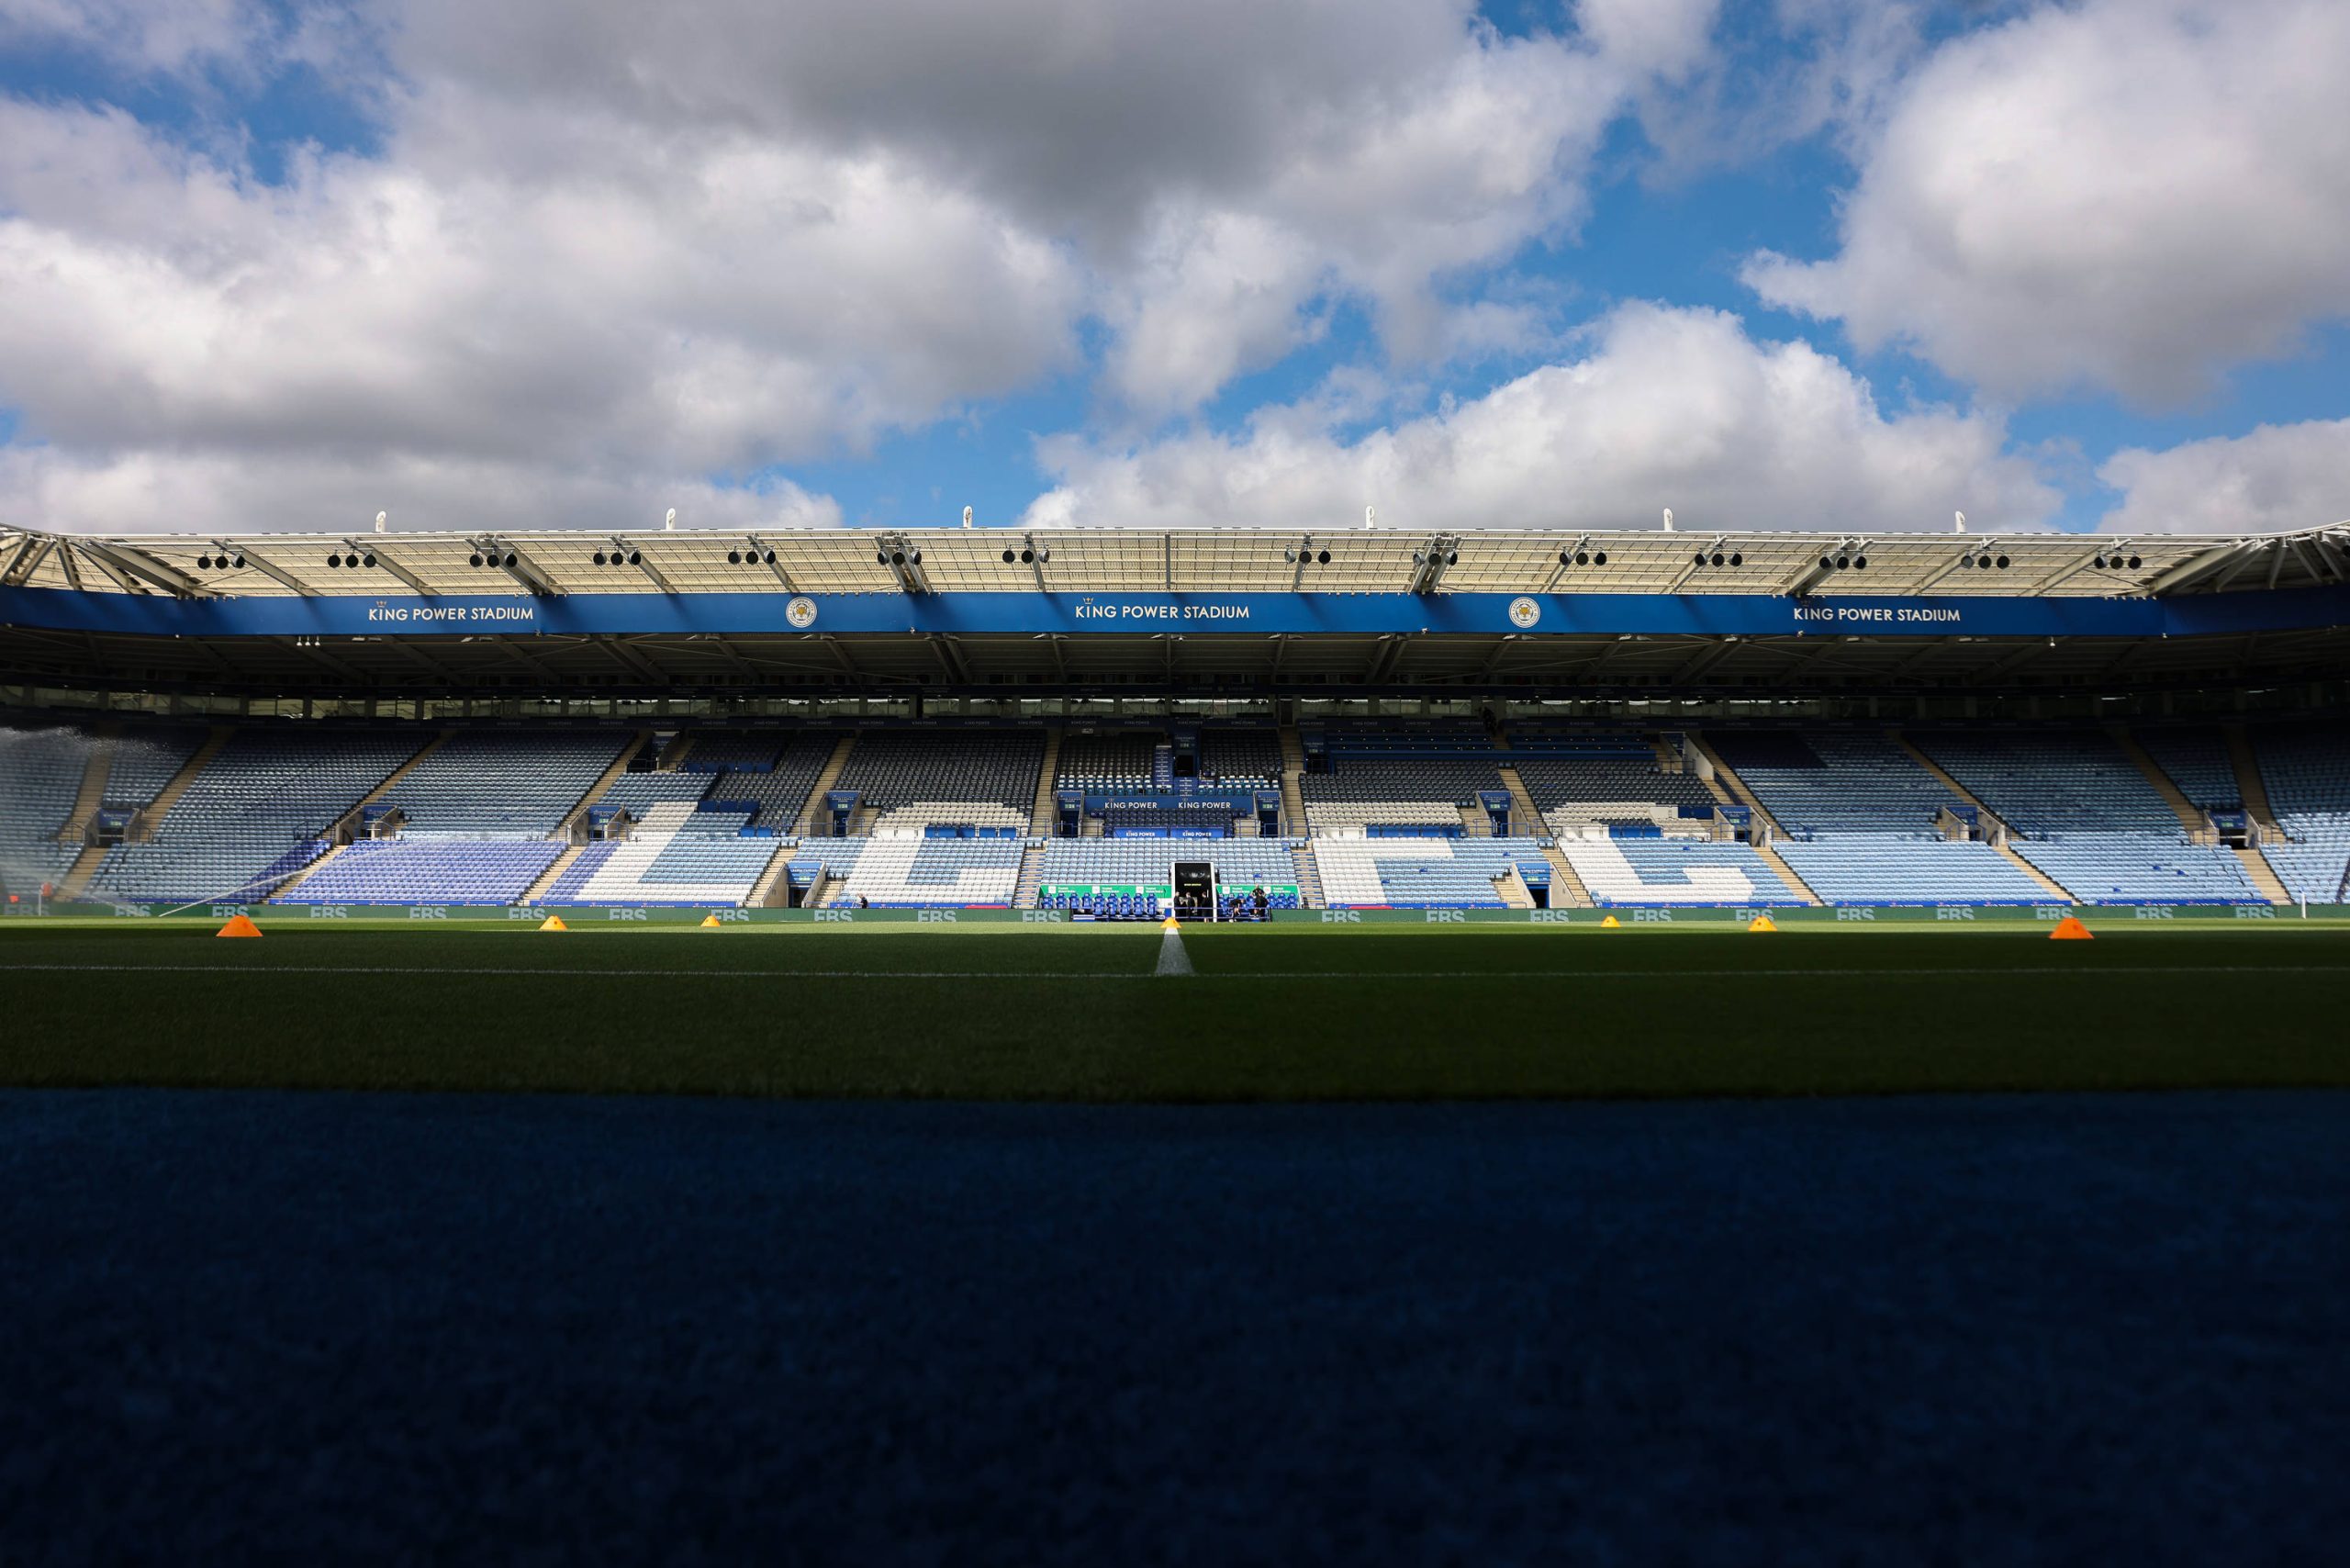 King Power Stadium stand showing LCFC letters